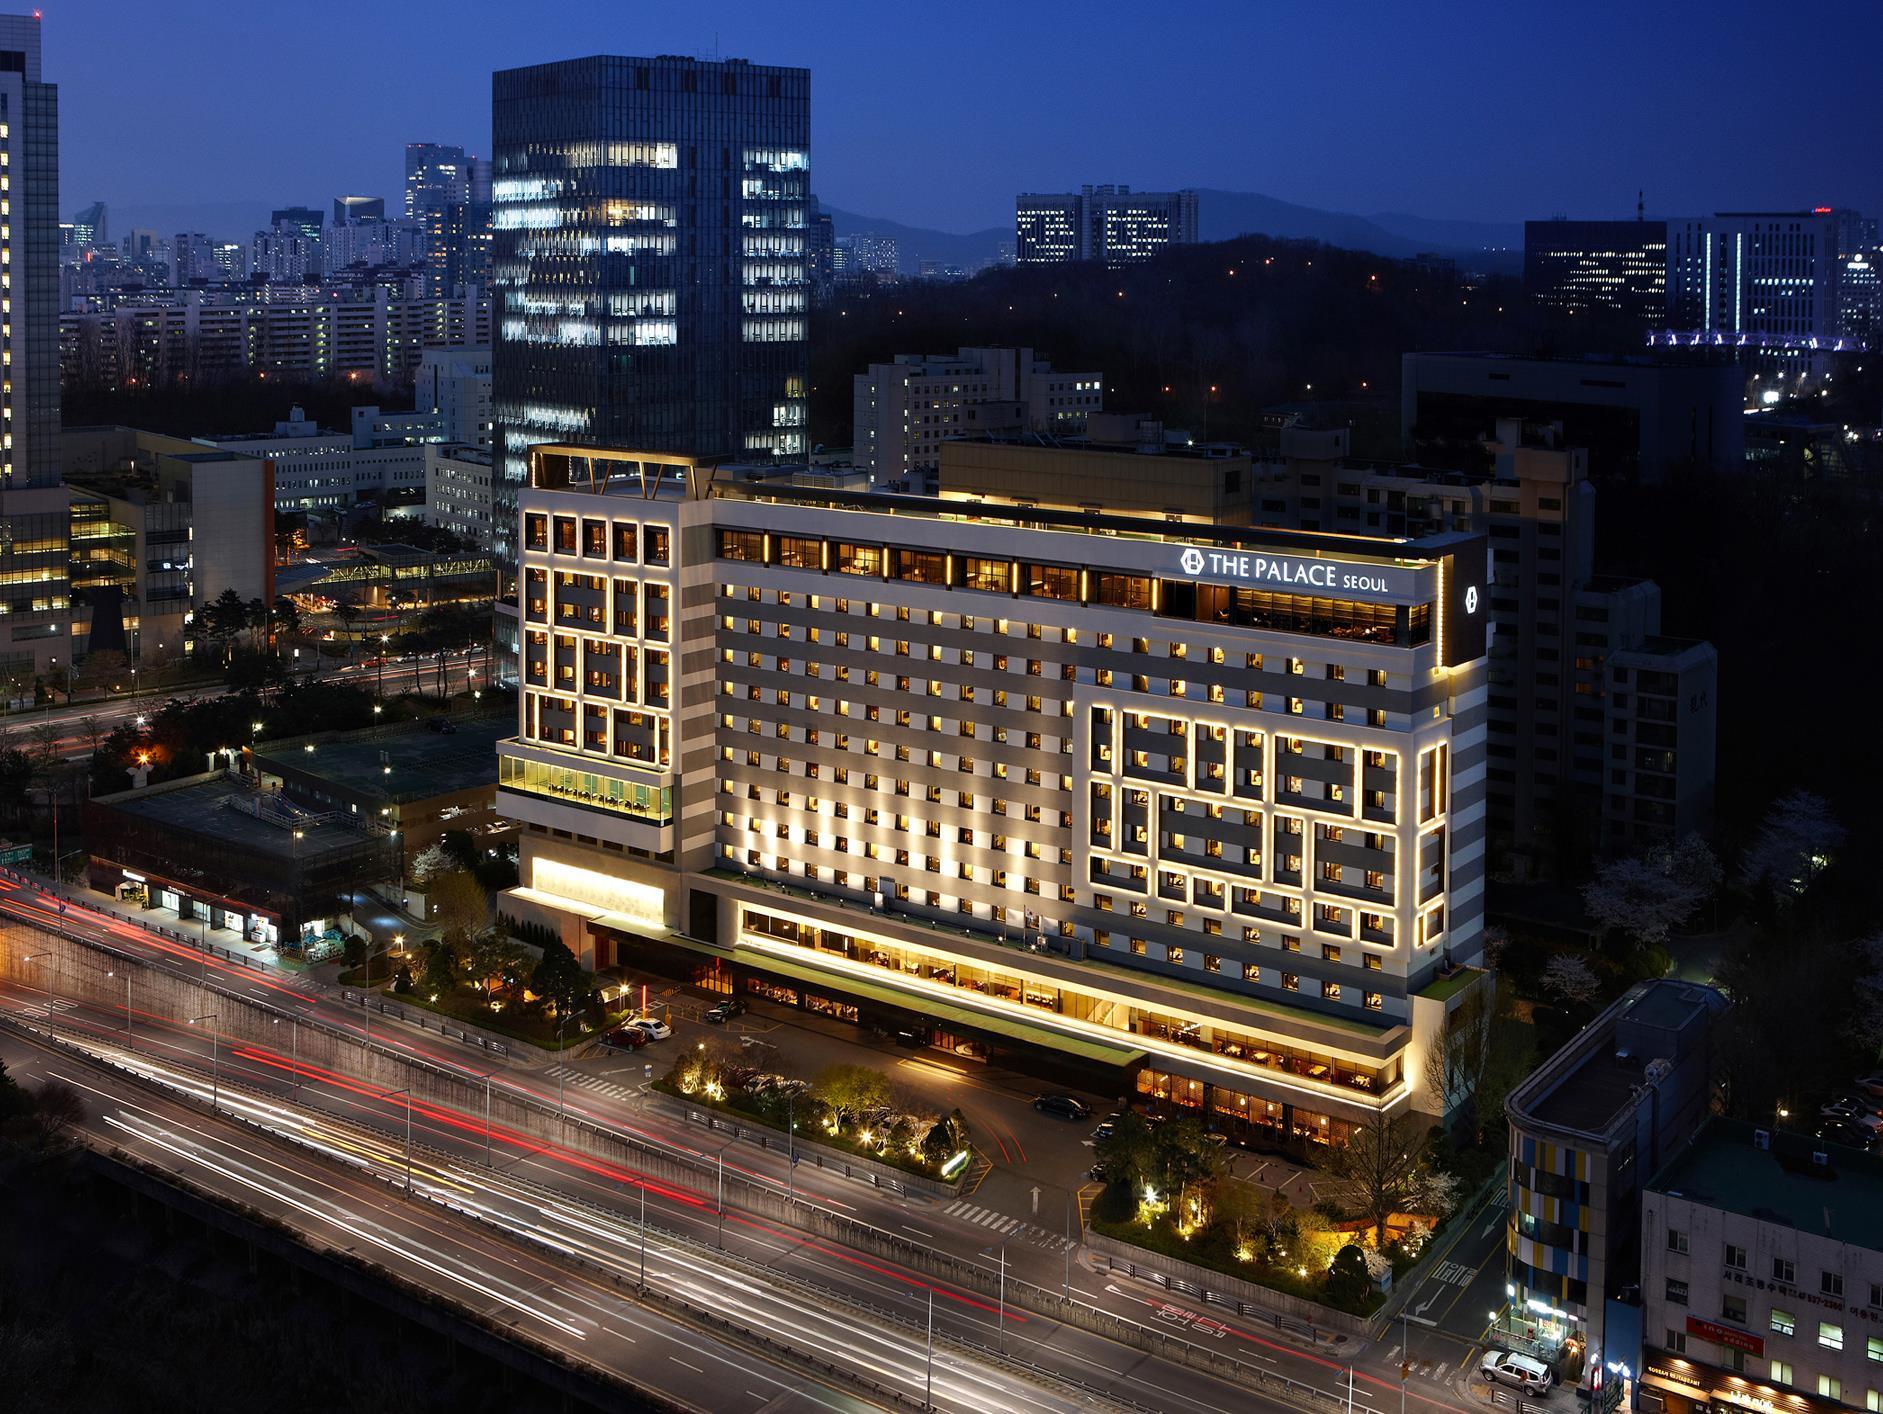 The Palace Hotel Seoul Korea FAQ 2016, What facilities are there in The Palace Hotel Seoul Korea 2016, What Languages Spoken are Supported in The Palace Hotel Seoul Korea 2016, Which payment cards are accepted in The Palace Hotel Seoul Korea , Korea The Palace Hotel Seoul room facilities and services Q&A 2016, Korea The Palace Hotel Seoul online booking services 2016, Korea The Palace Hotel Seoul address 2016, Korea The Palace Hotel Seoul telephone number 2016,Korea The Palace Hotel Seoul map 2016, Korea The Palace Hotel Seoul traffic guide 2016, how to go Korea The Palace Hotel Seoul, Korea The Palace Hotel Seoul booking online 2016, Korea The Palace Hotel Seoul room types 2016.